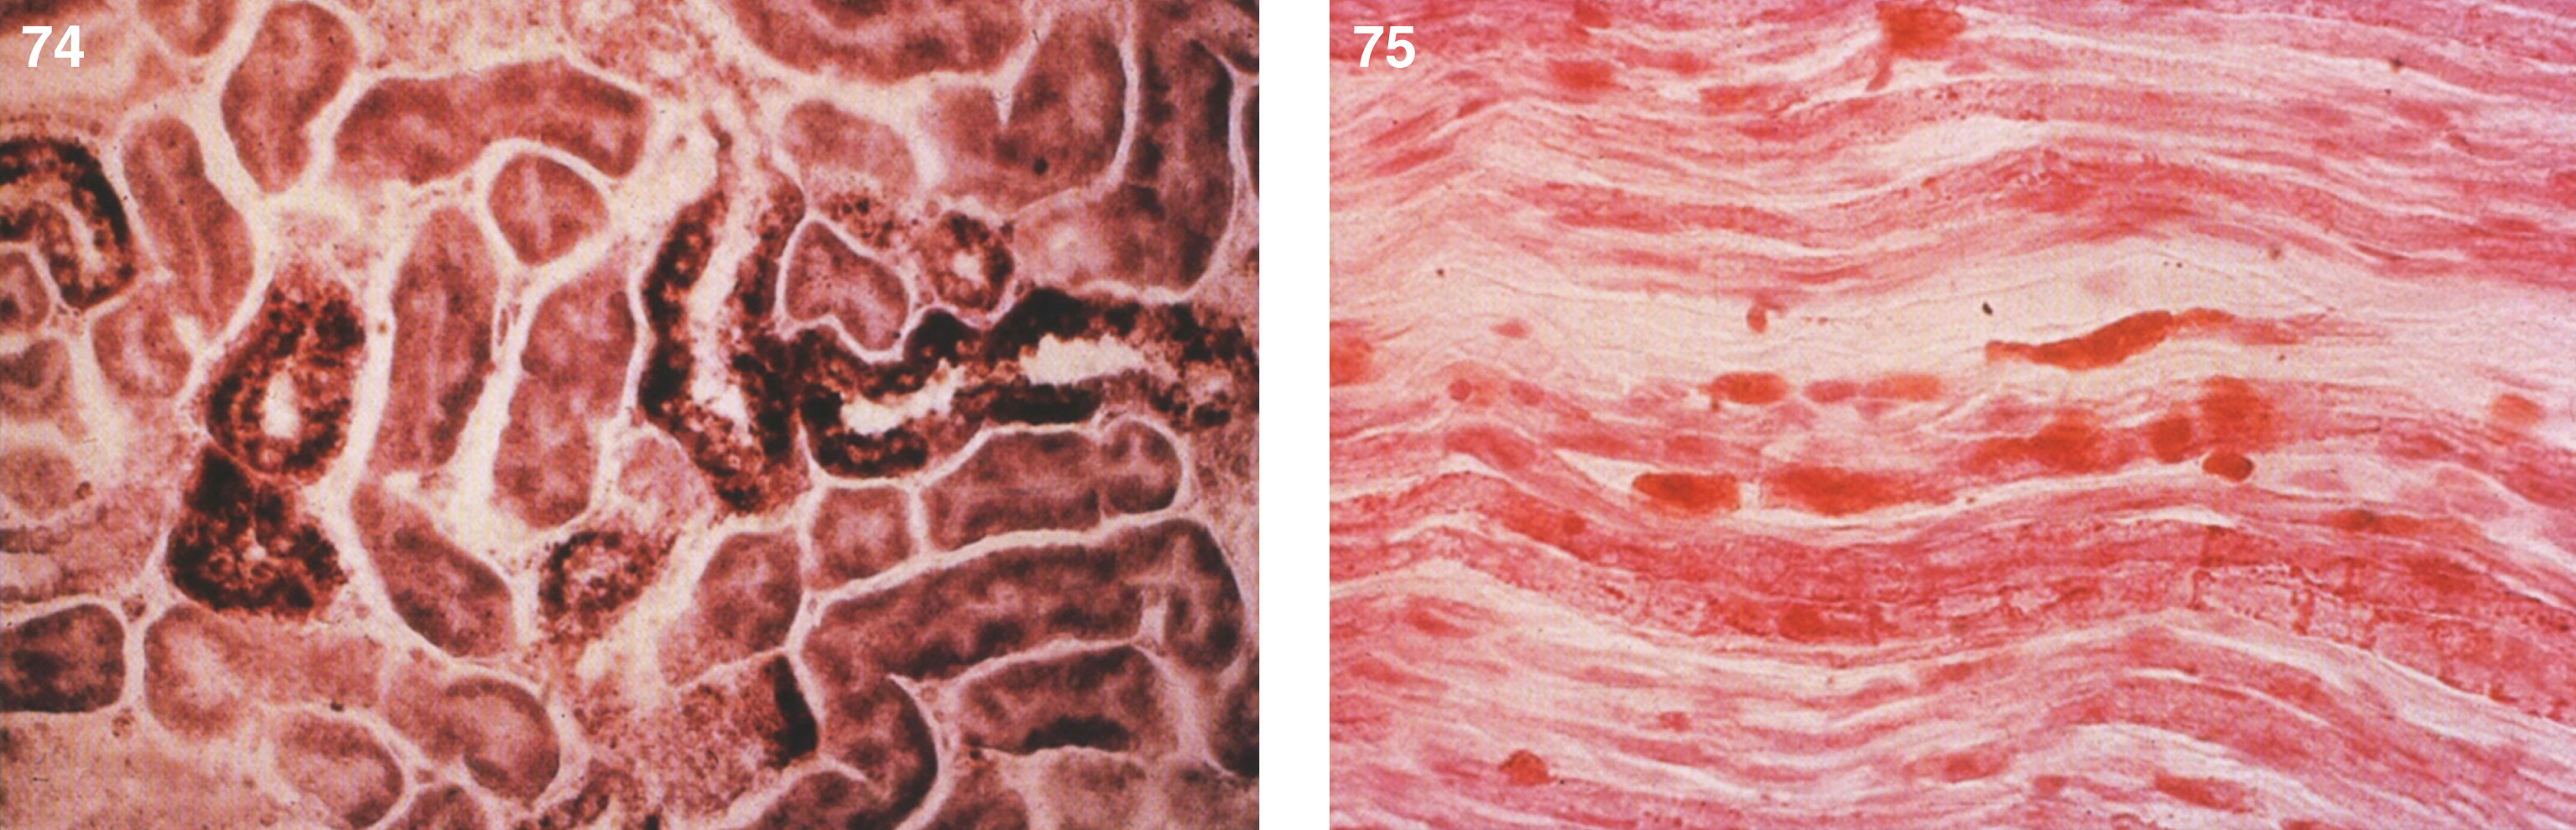 Metachromatic leukodystrophy. Microscopic section of the kidney shows brown metochromasia of the renal tubular epithelial cells; (75) Metachromatic leukodystrophy. A sural nerve biopsy show metachromatic substance within the nerve fibers.